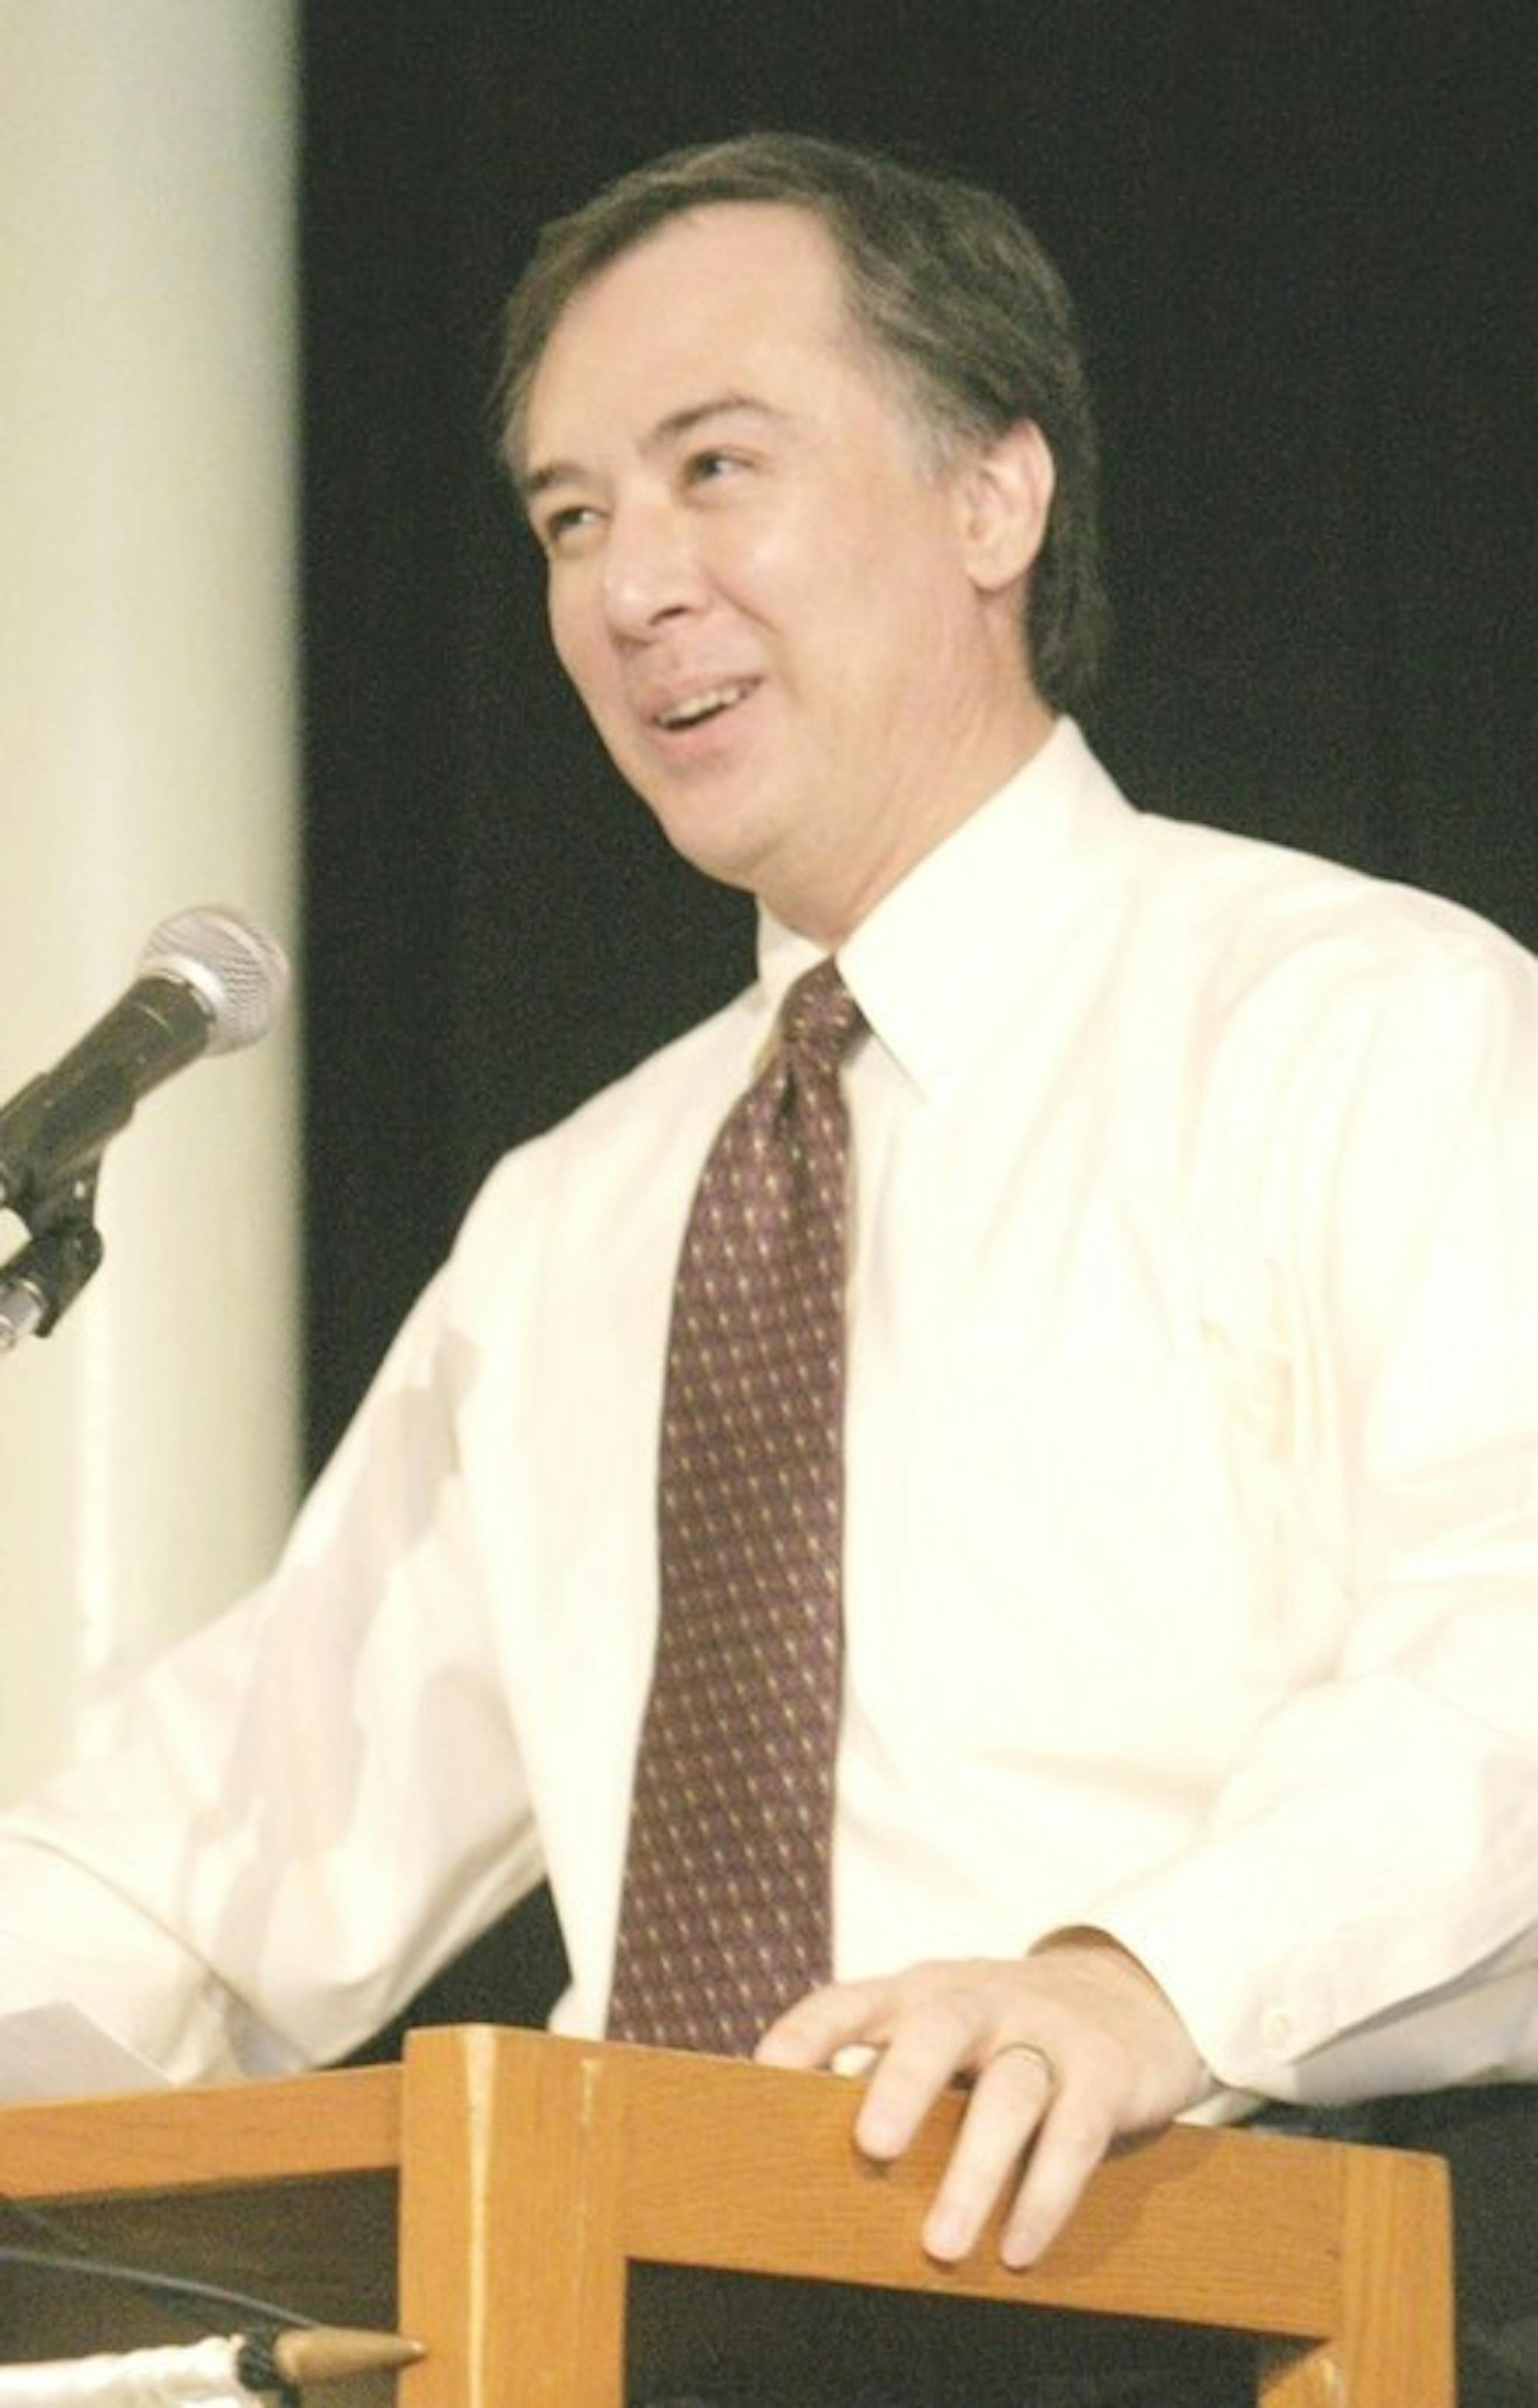 Larimore, who strove to improve relations between the College and the Greek system, speaks here at the 2005 Order of Omega awards.